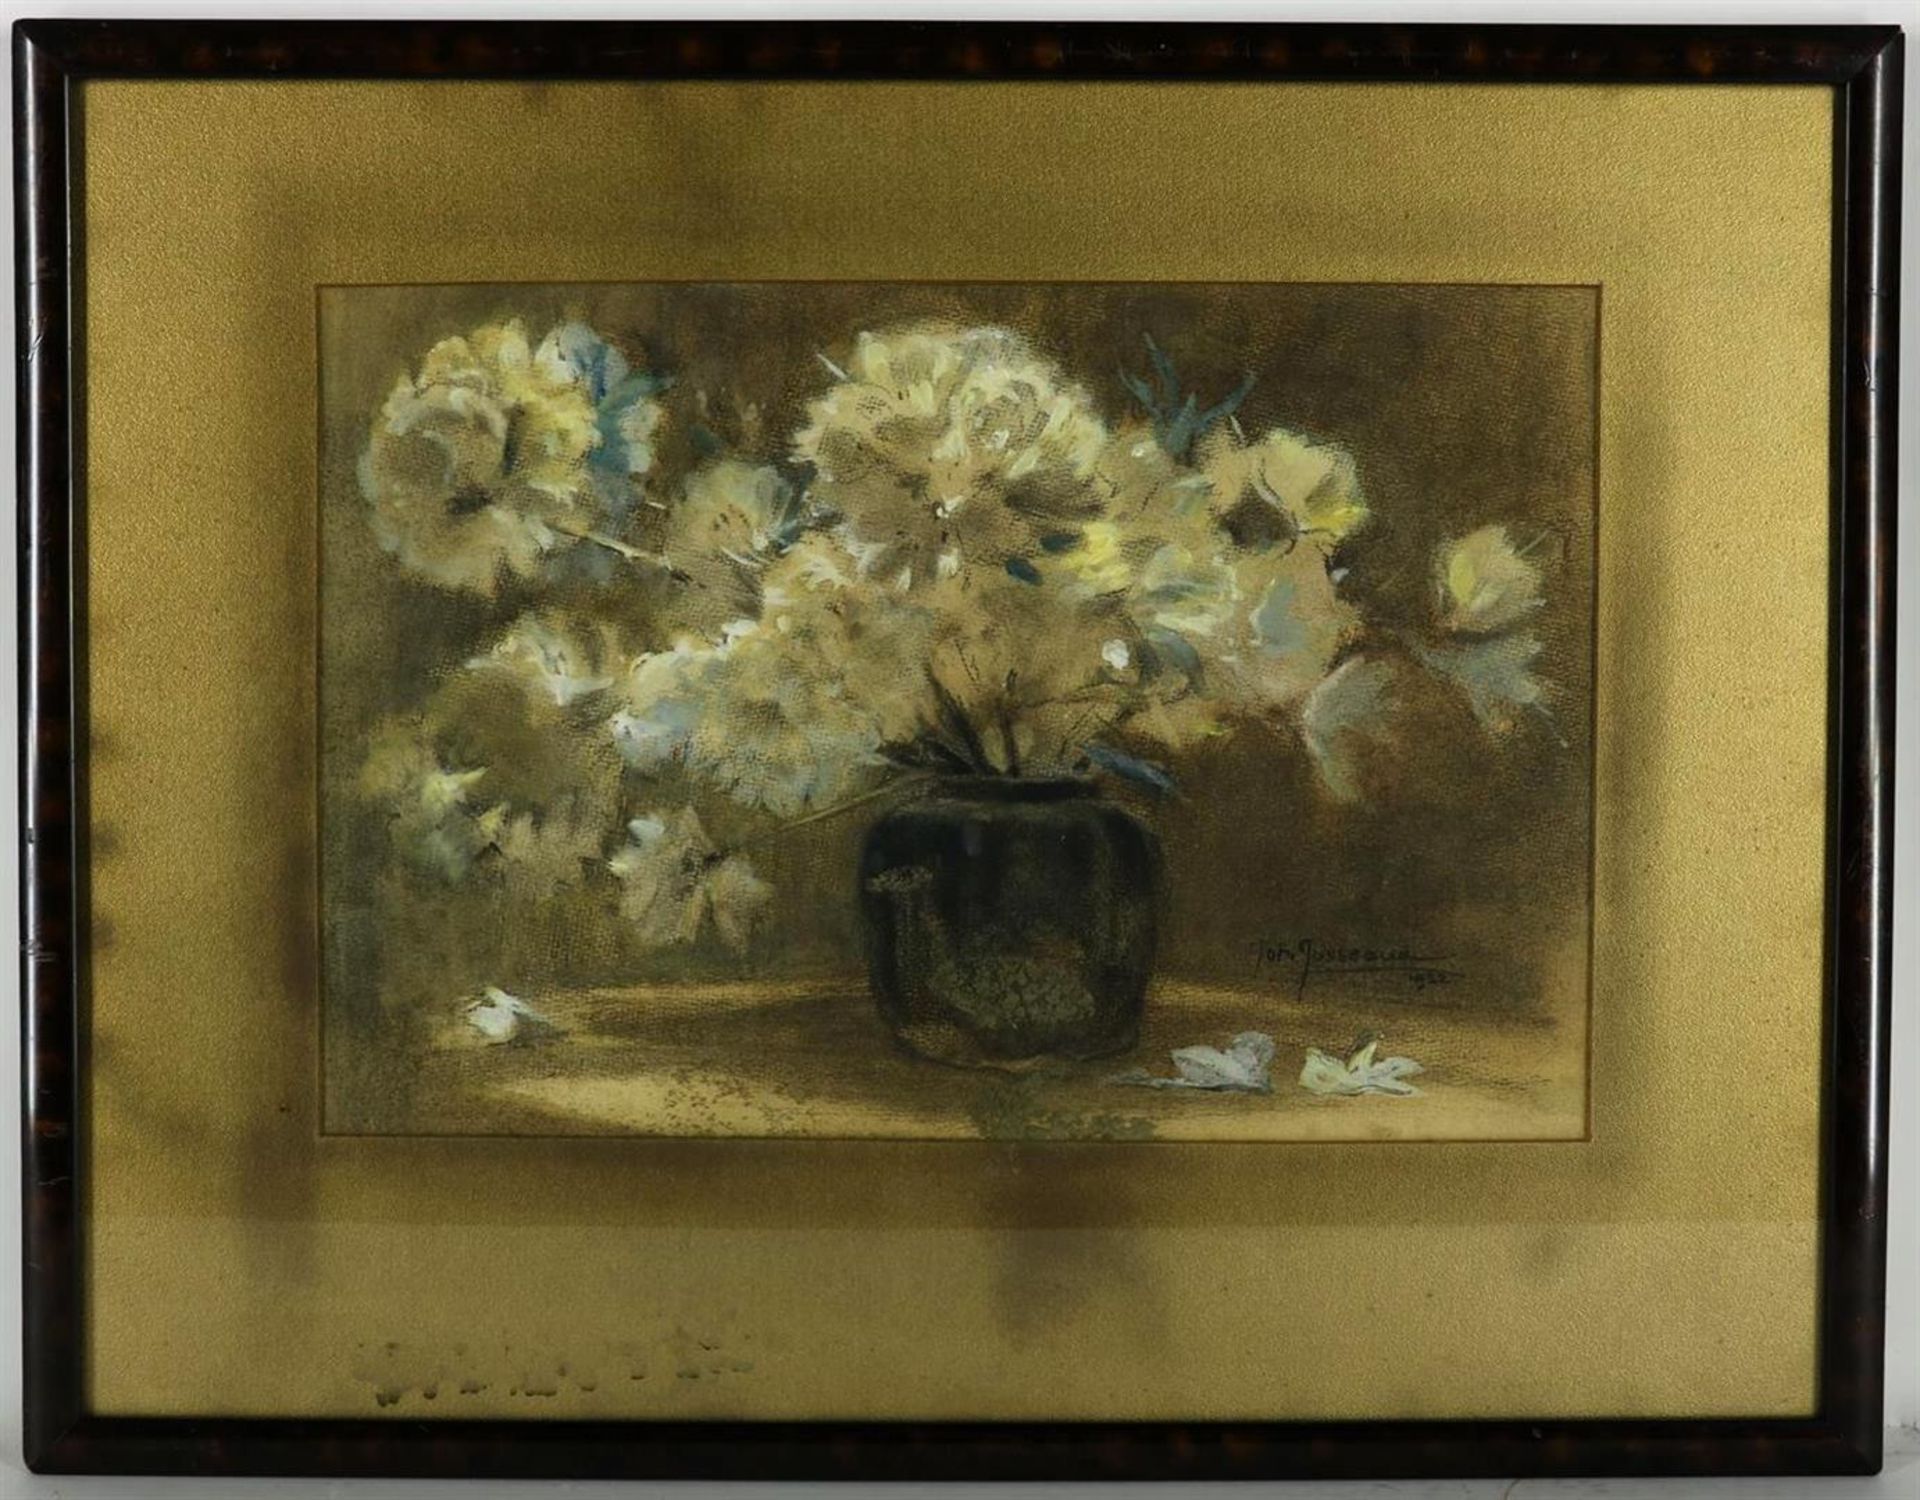 Johannes Josseaud (1880-1935) Flower still life, signed and dated 1932 lower right, pastel 30 x 45 - Image 2 of 4